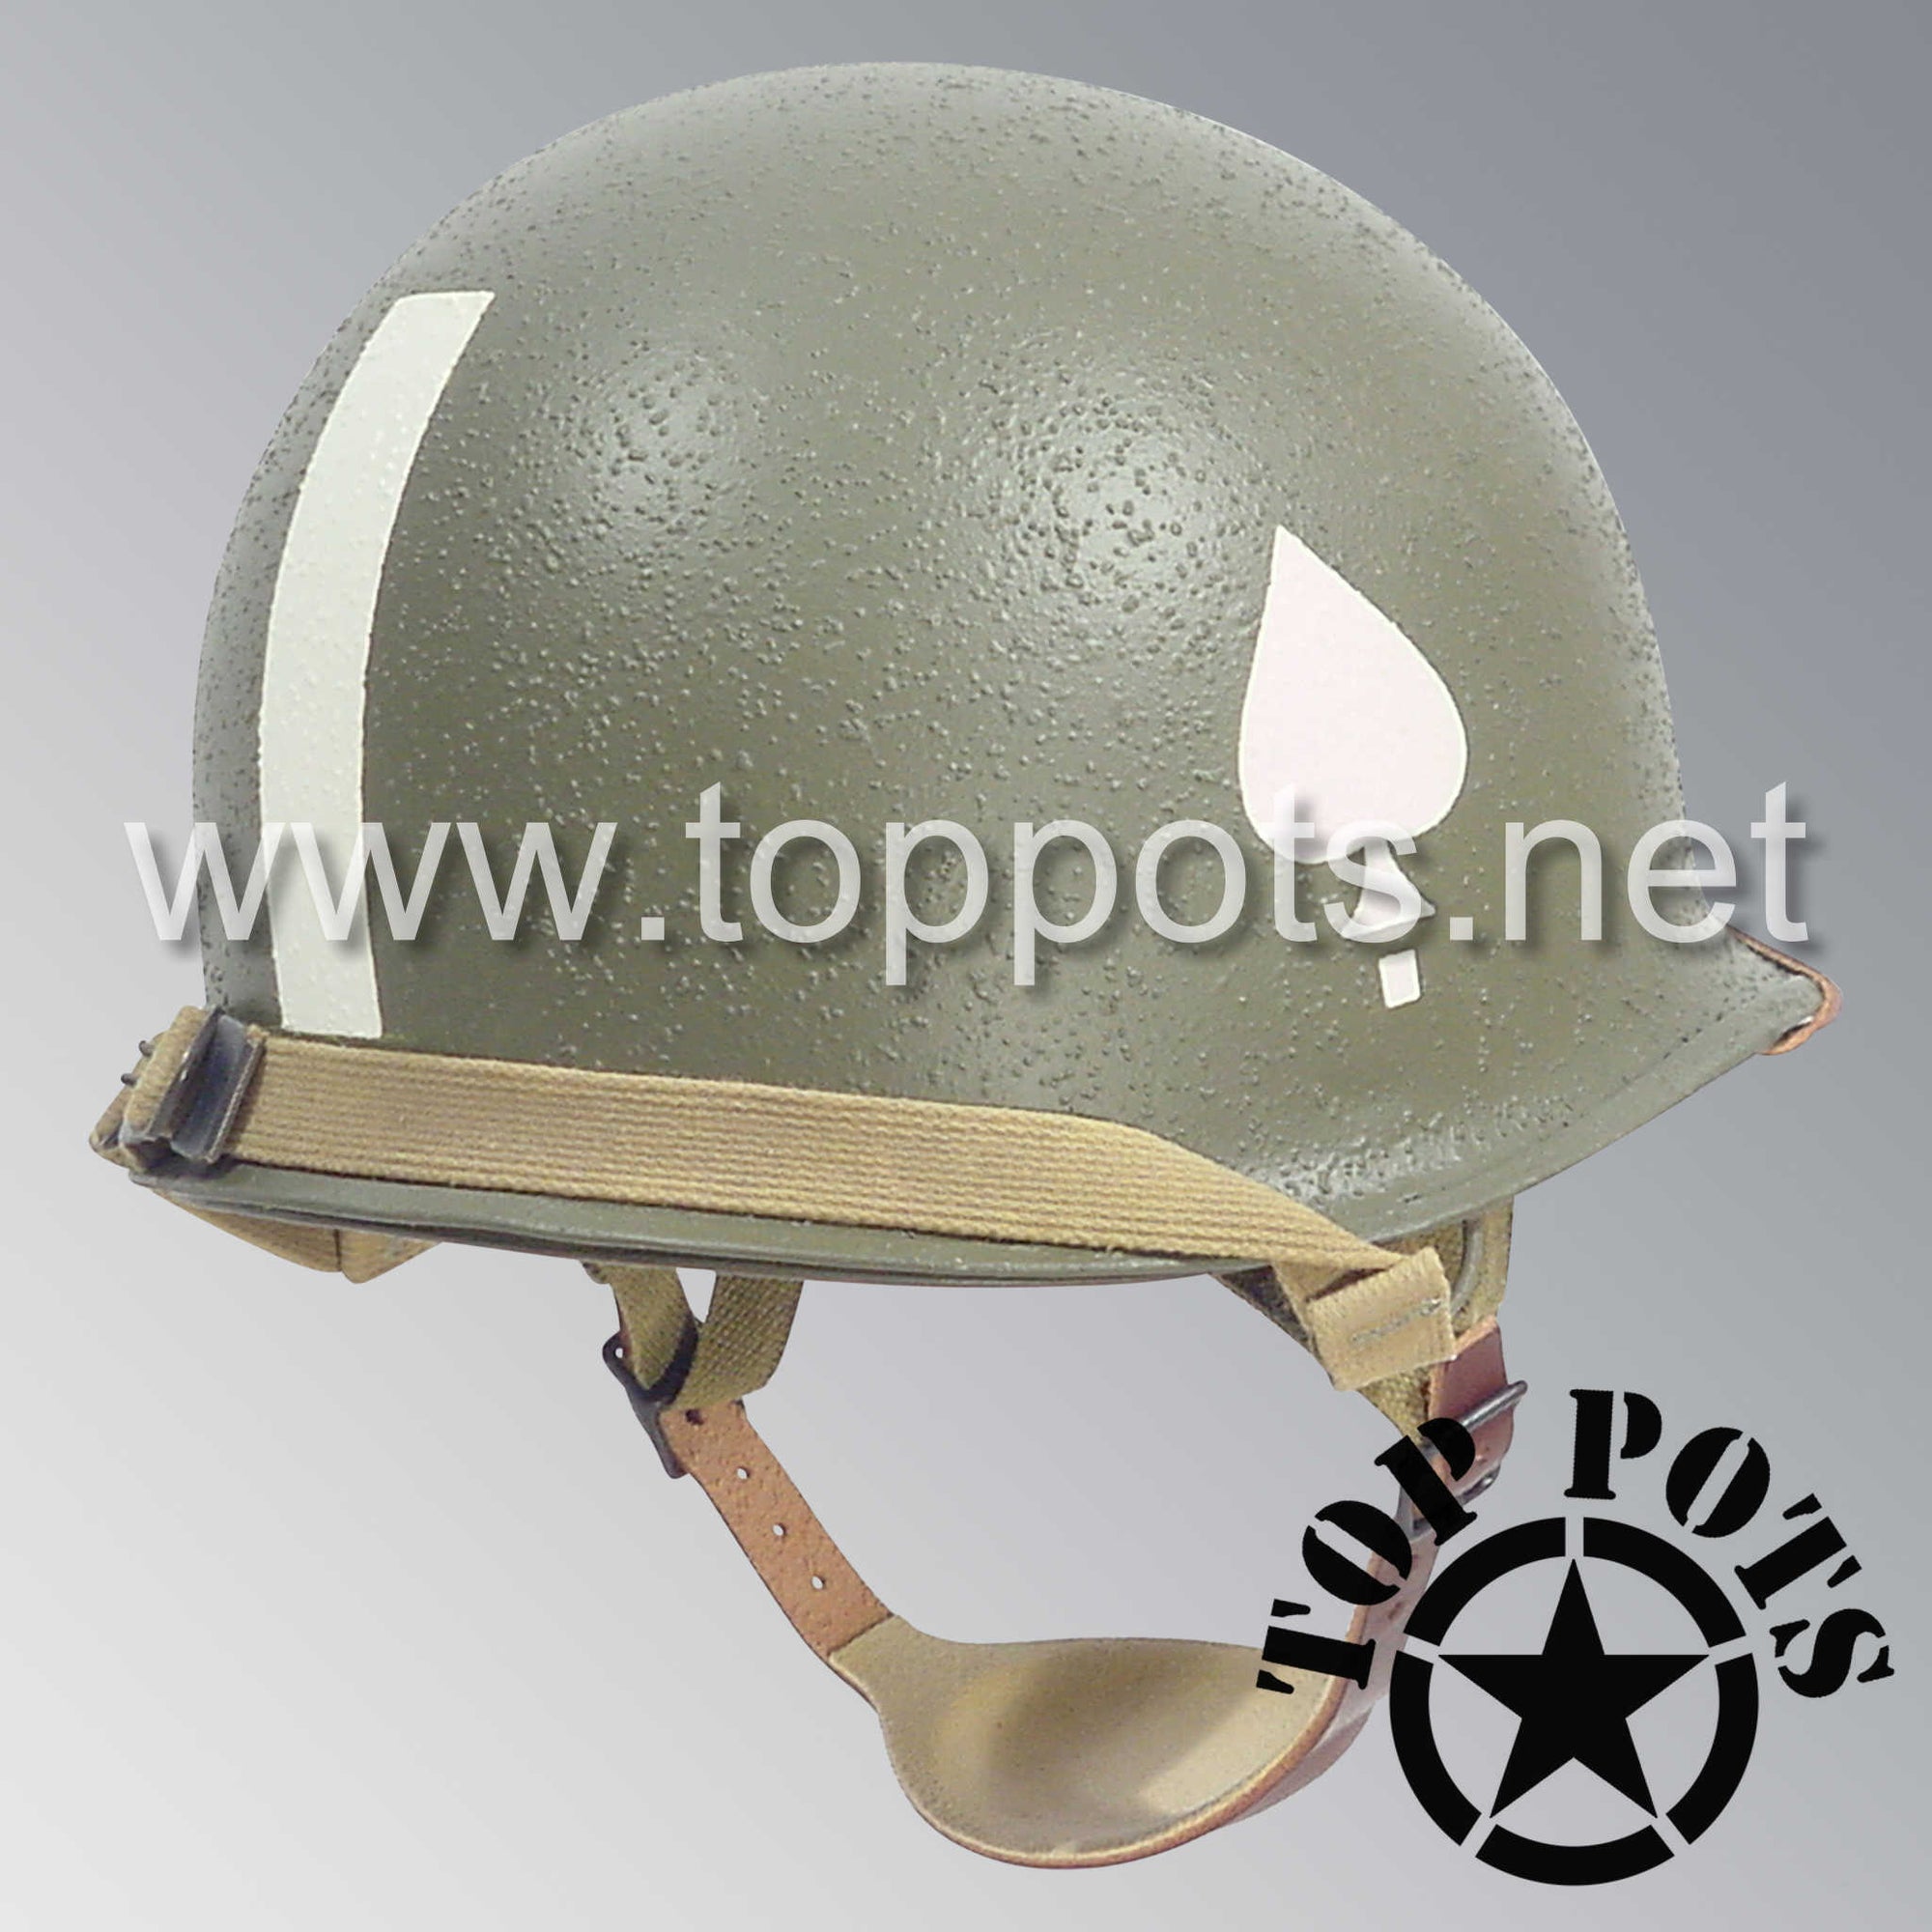 WWII US Army Restored Original M2 Paratrooper Airborne Helmet D Bale Shell and Liner with 506th PIR 2nd Battalion Emblem and Officer Leadership Stripe